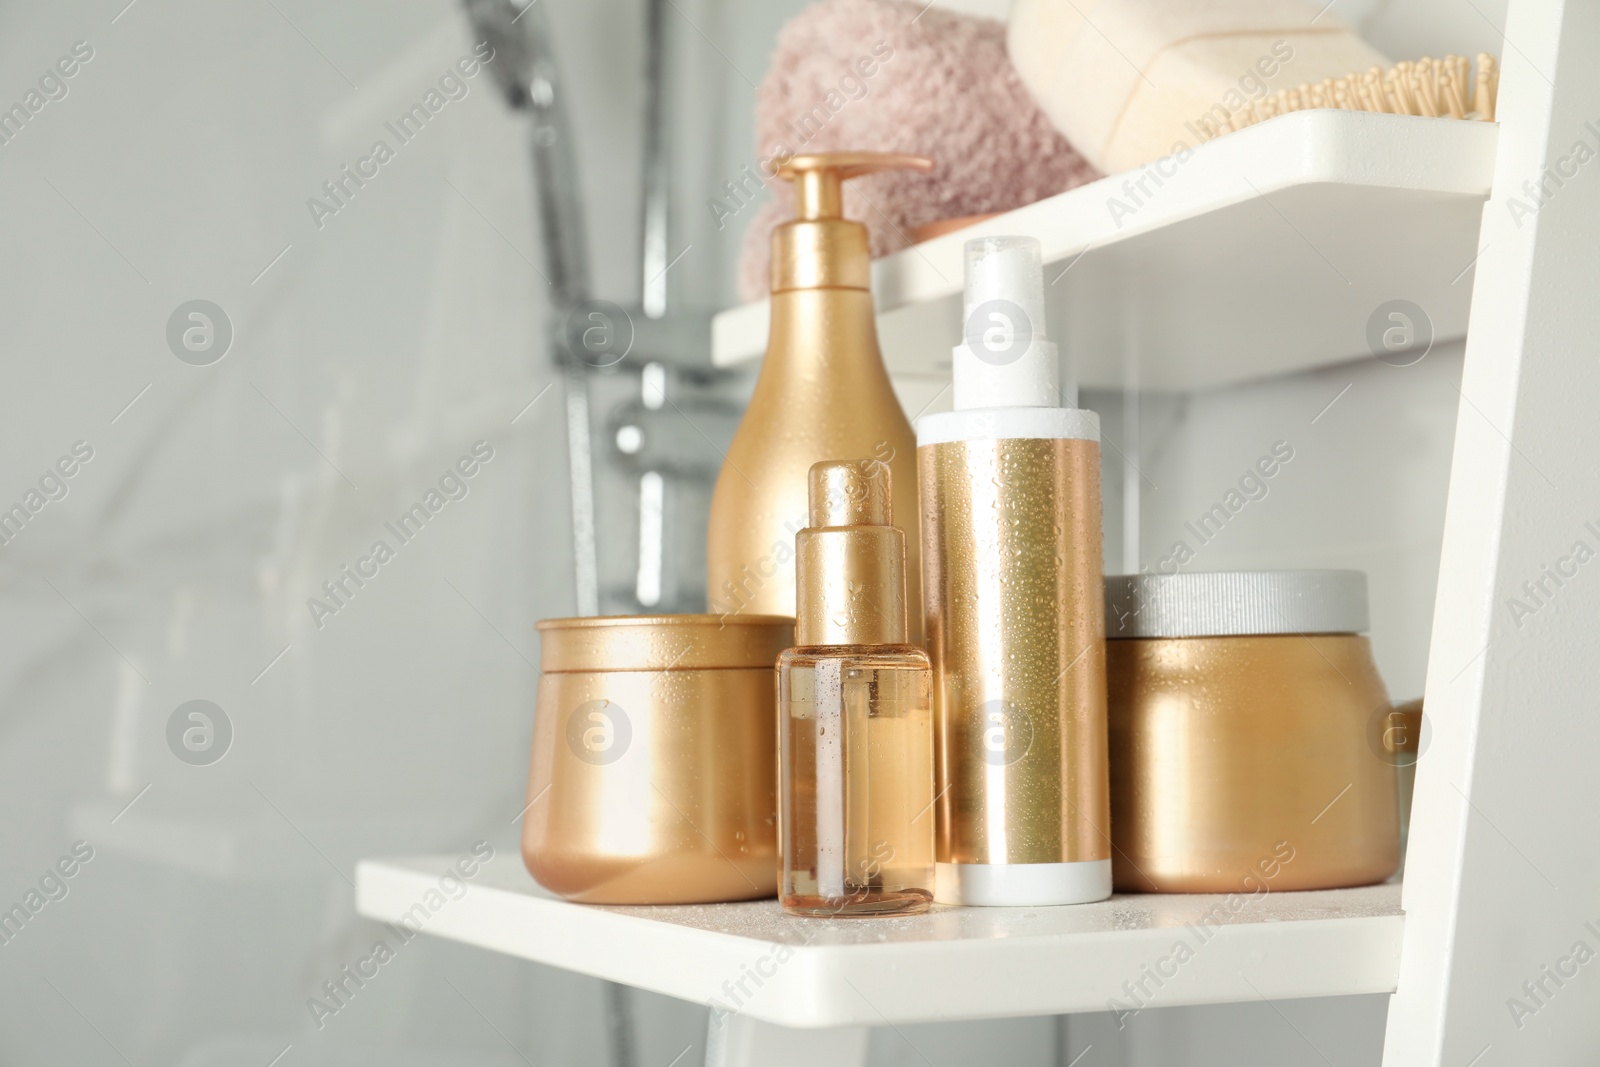 Photo of Set of hair care cosmetic products covered with water drops on white rack in bathroom